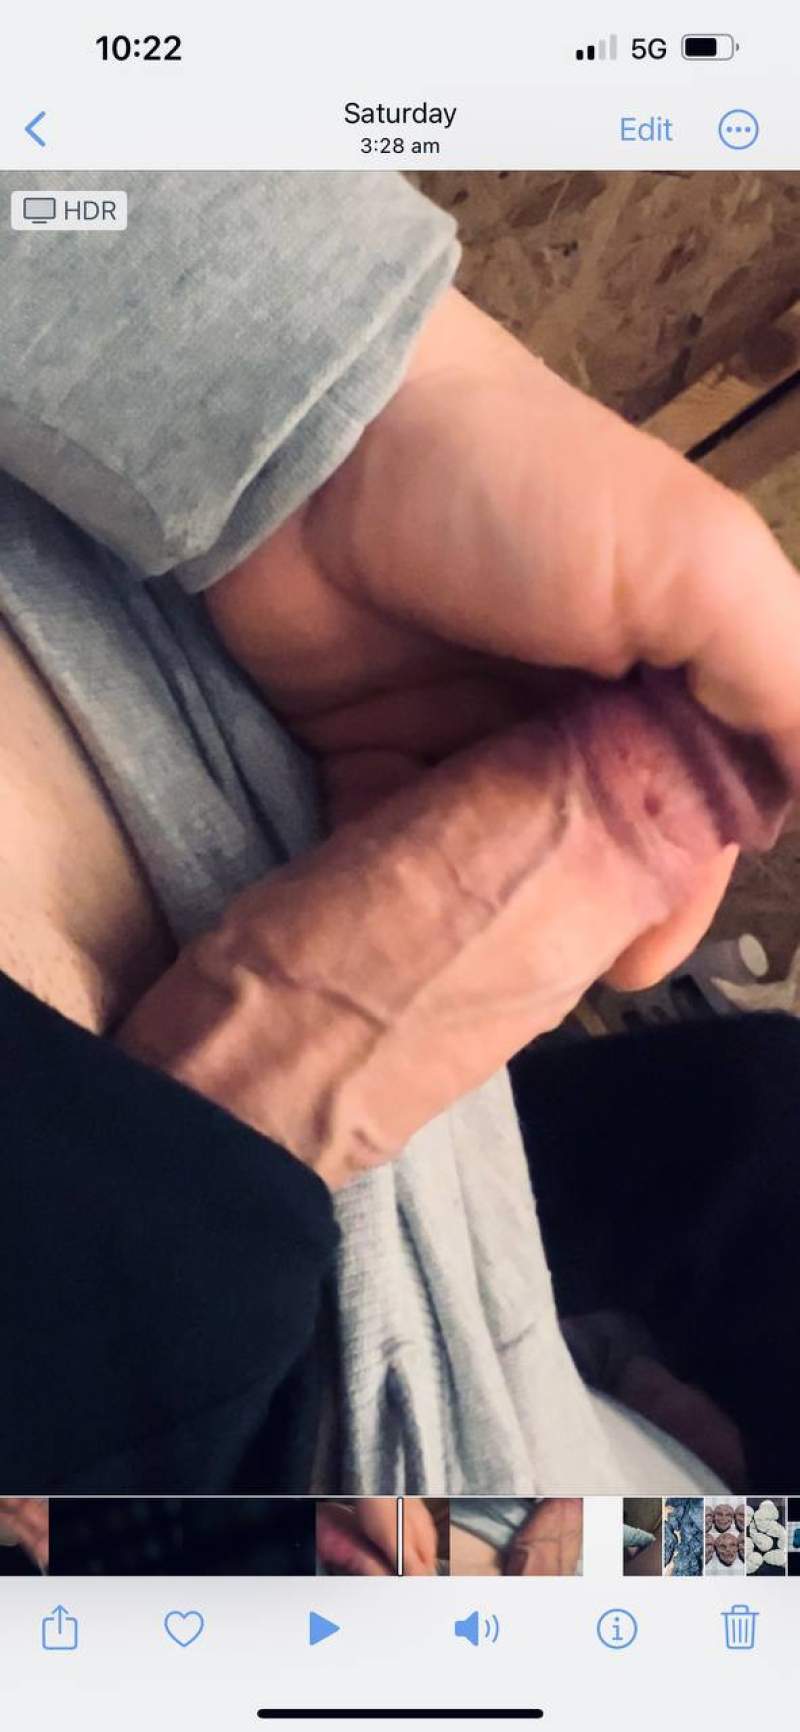 Looking for couple or women to have fun with